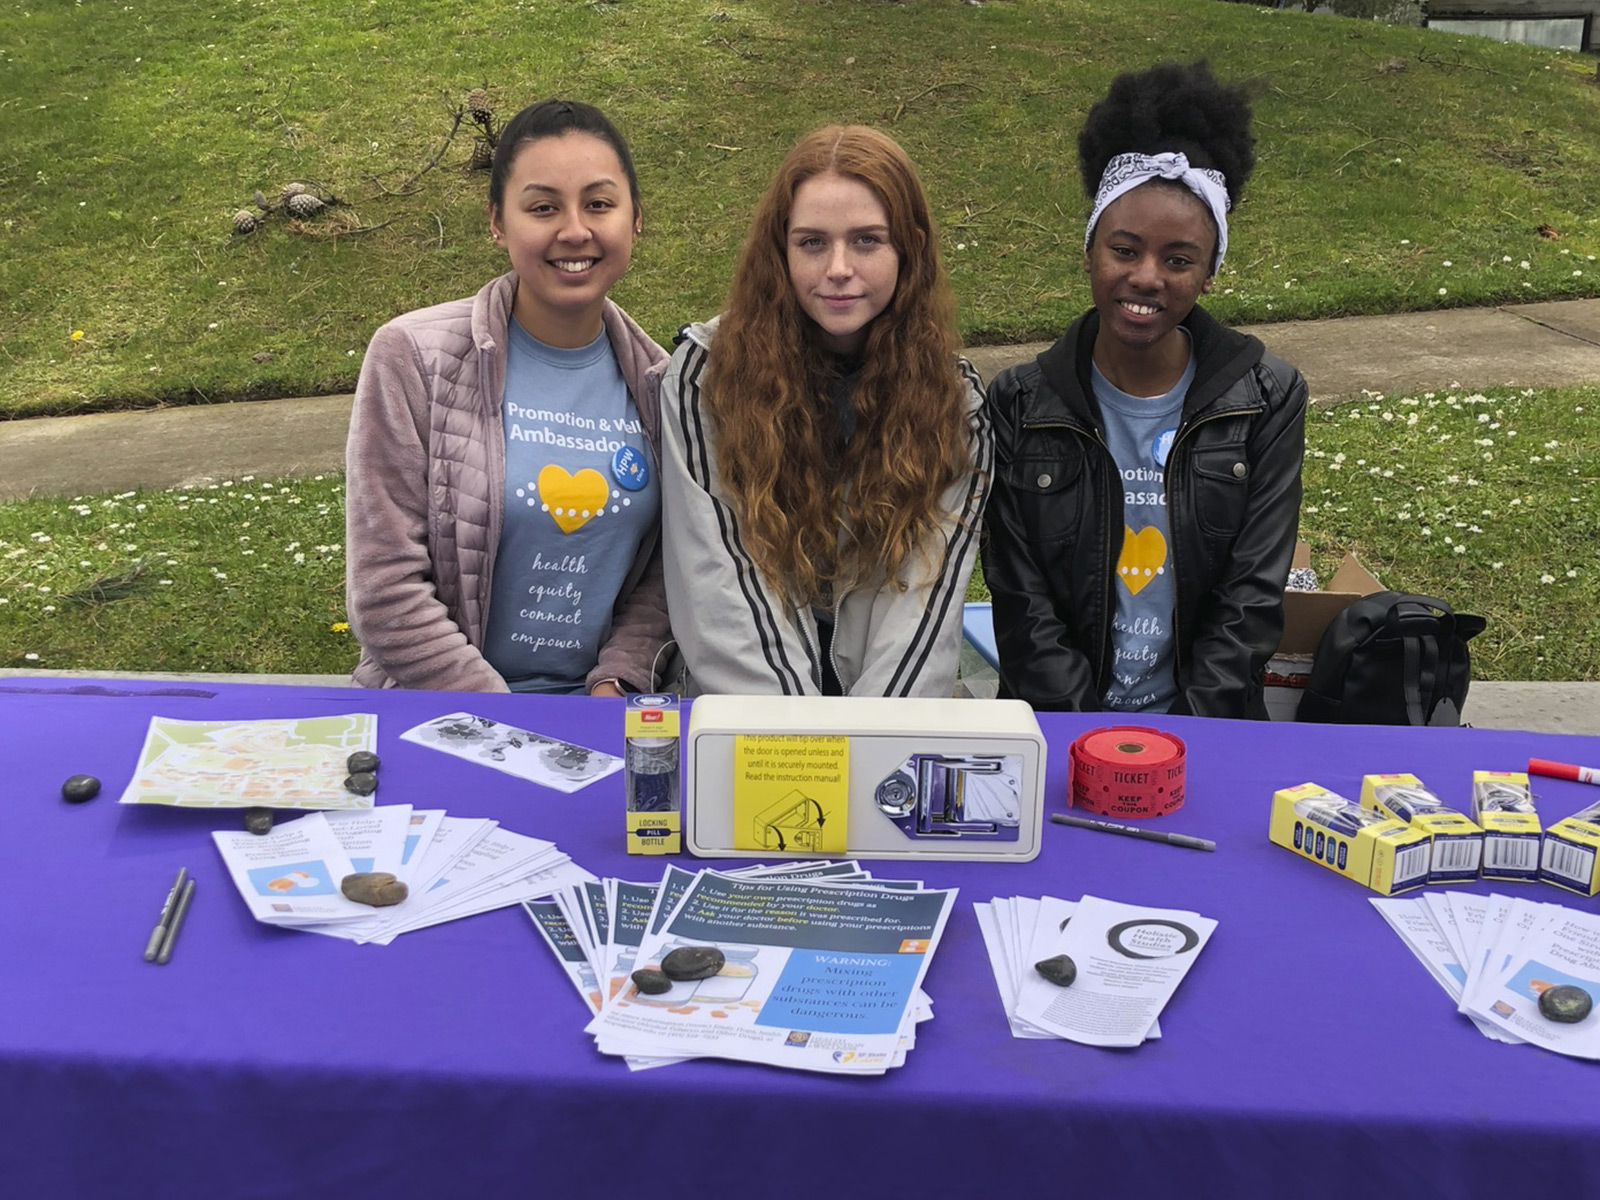 Three Students Tabling an Event